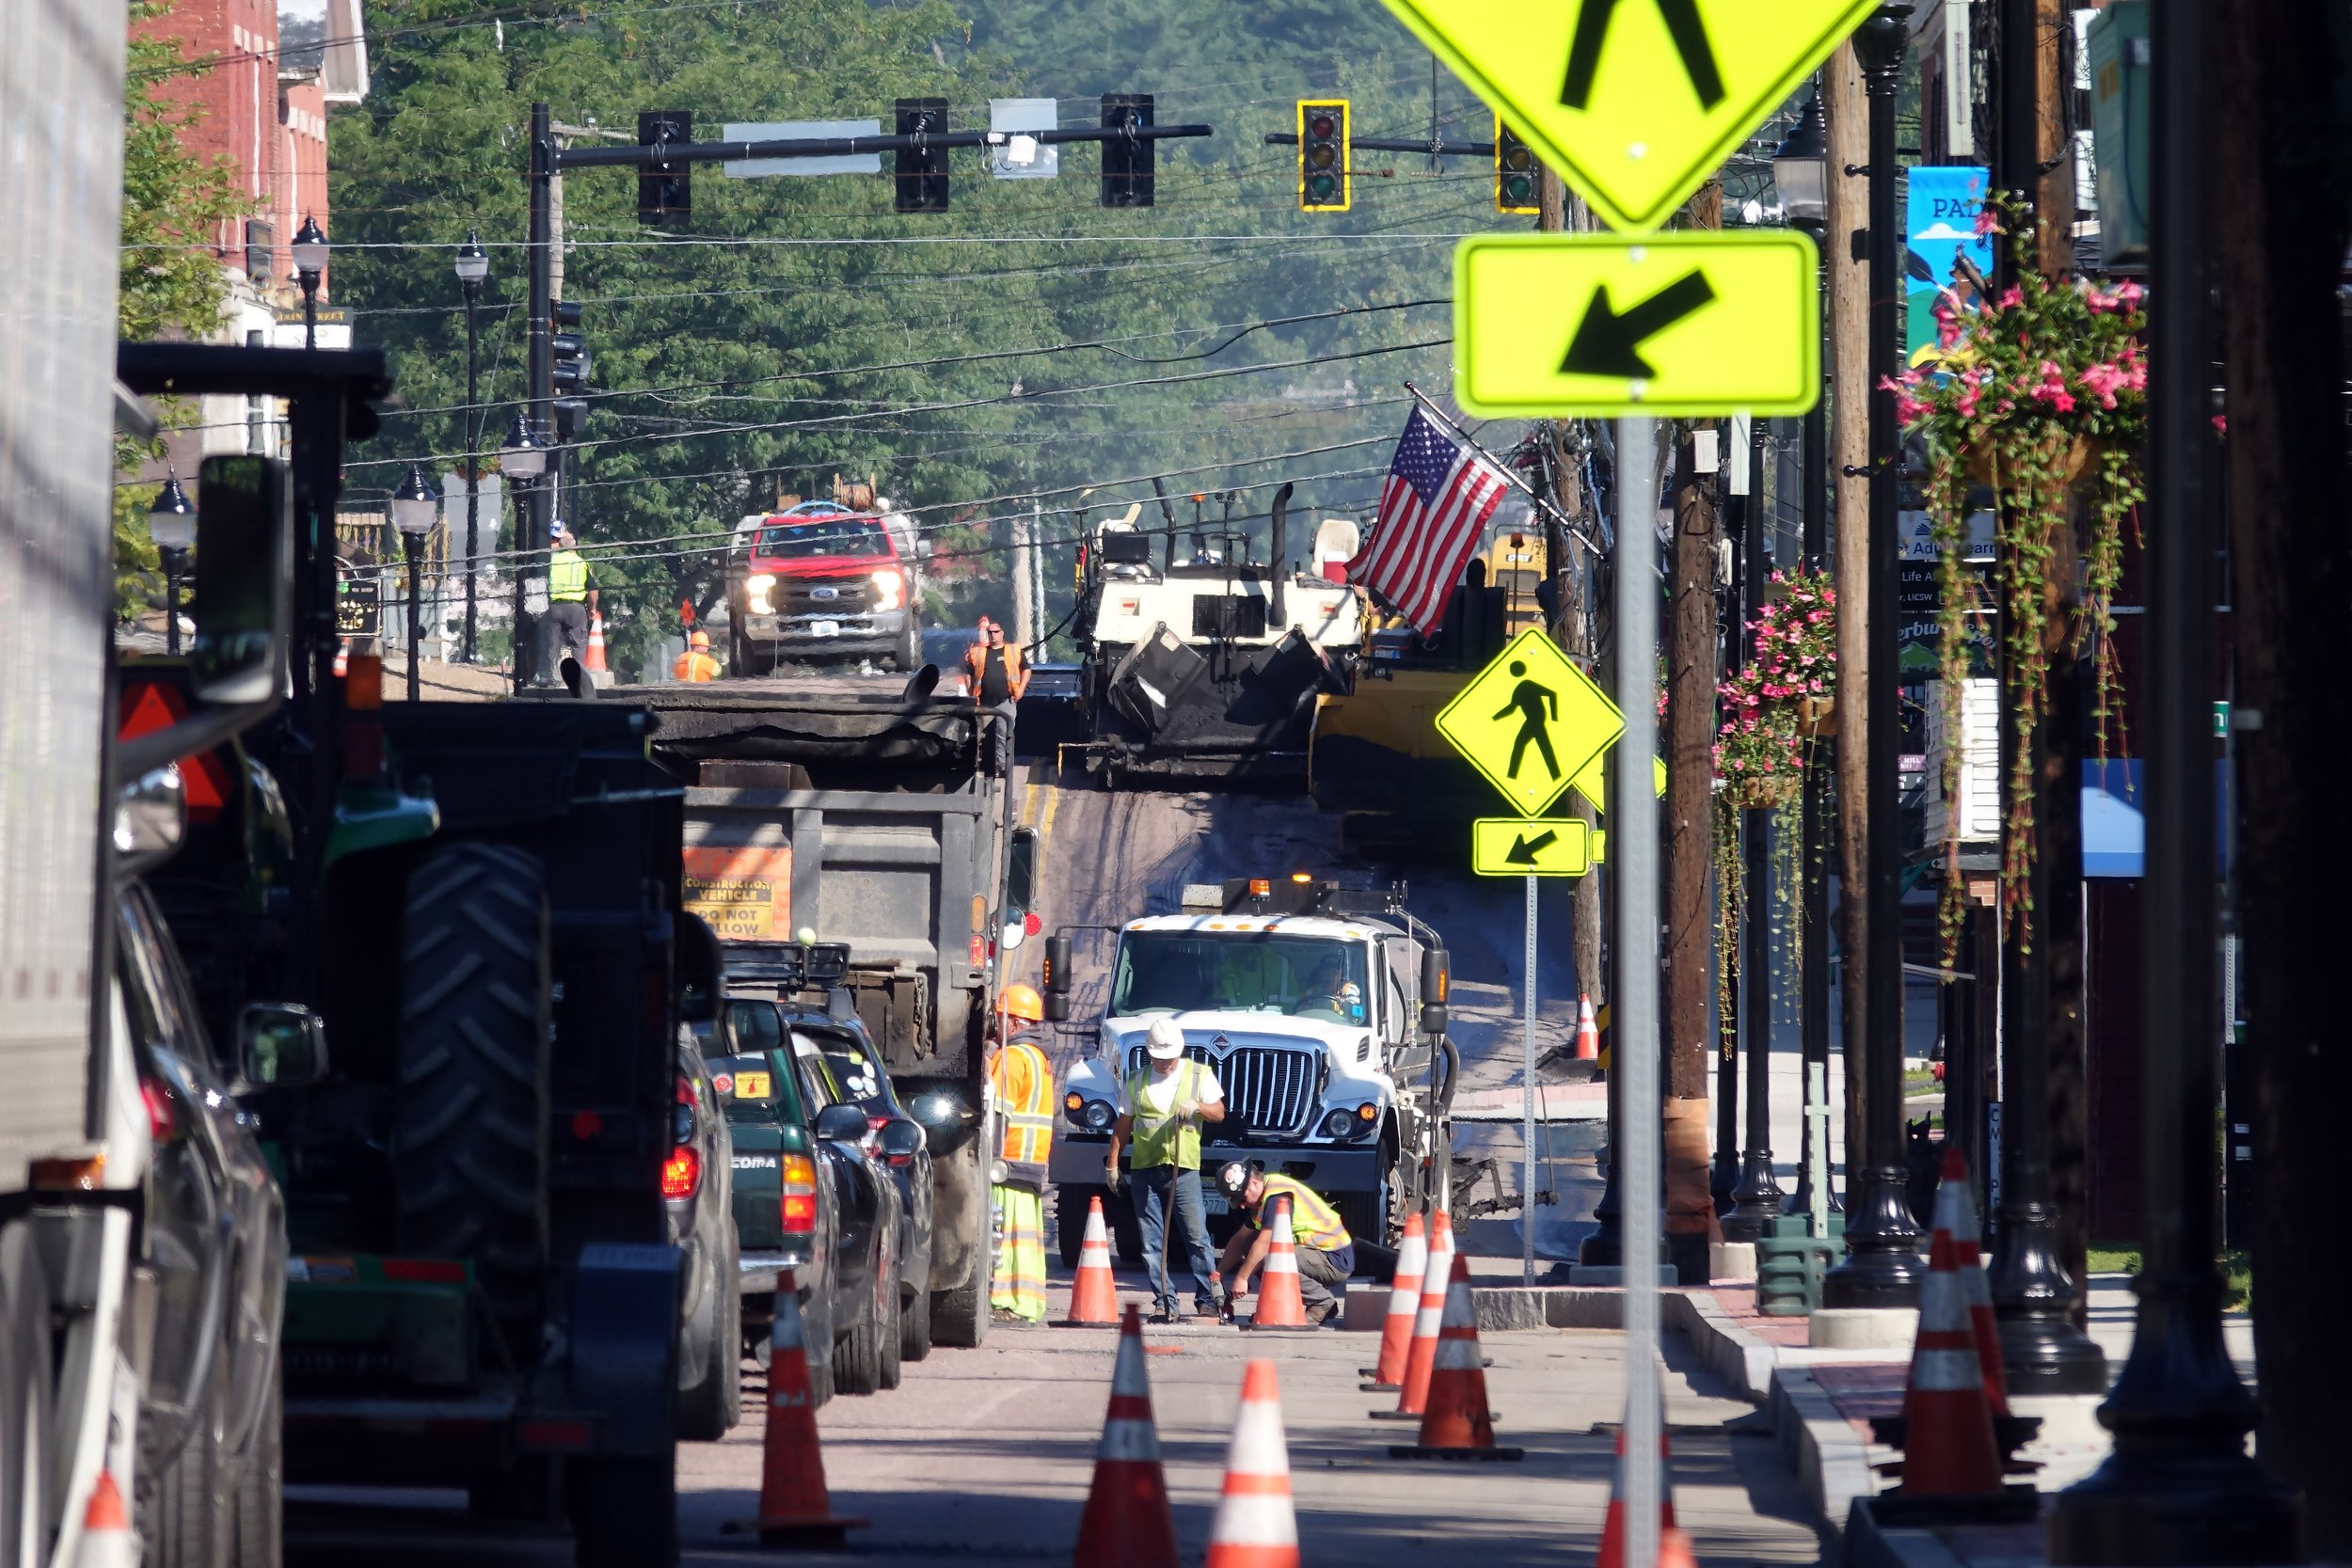  The scene on Main Street this summer changed daily as JA McDonald crews spent their third season in Waterbury on the overhaul to about a mile of Main Street. Photo by Gordon Miller 